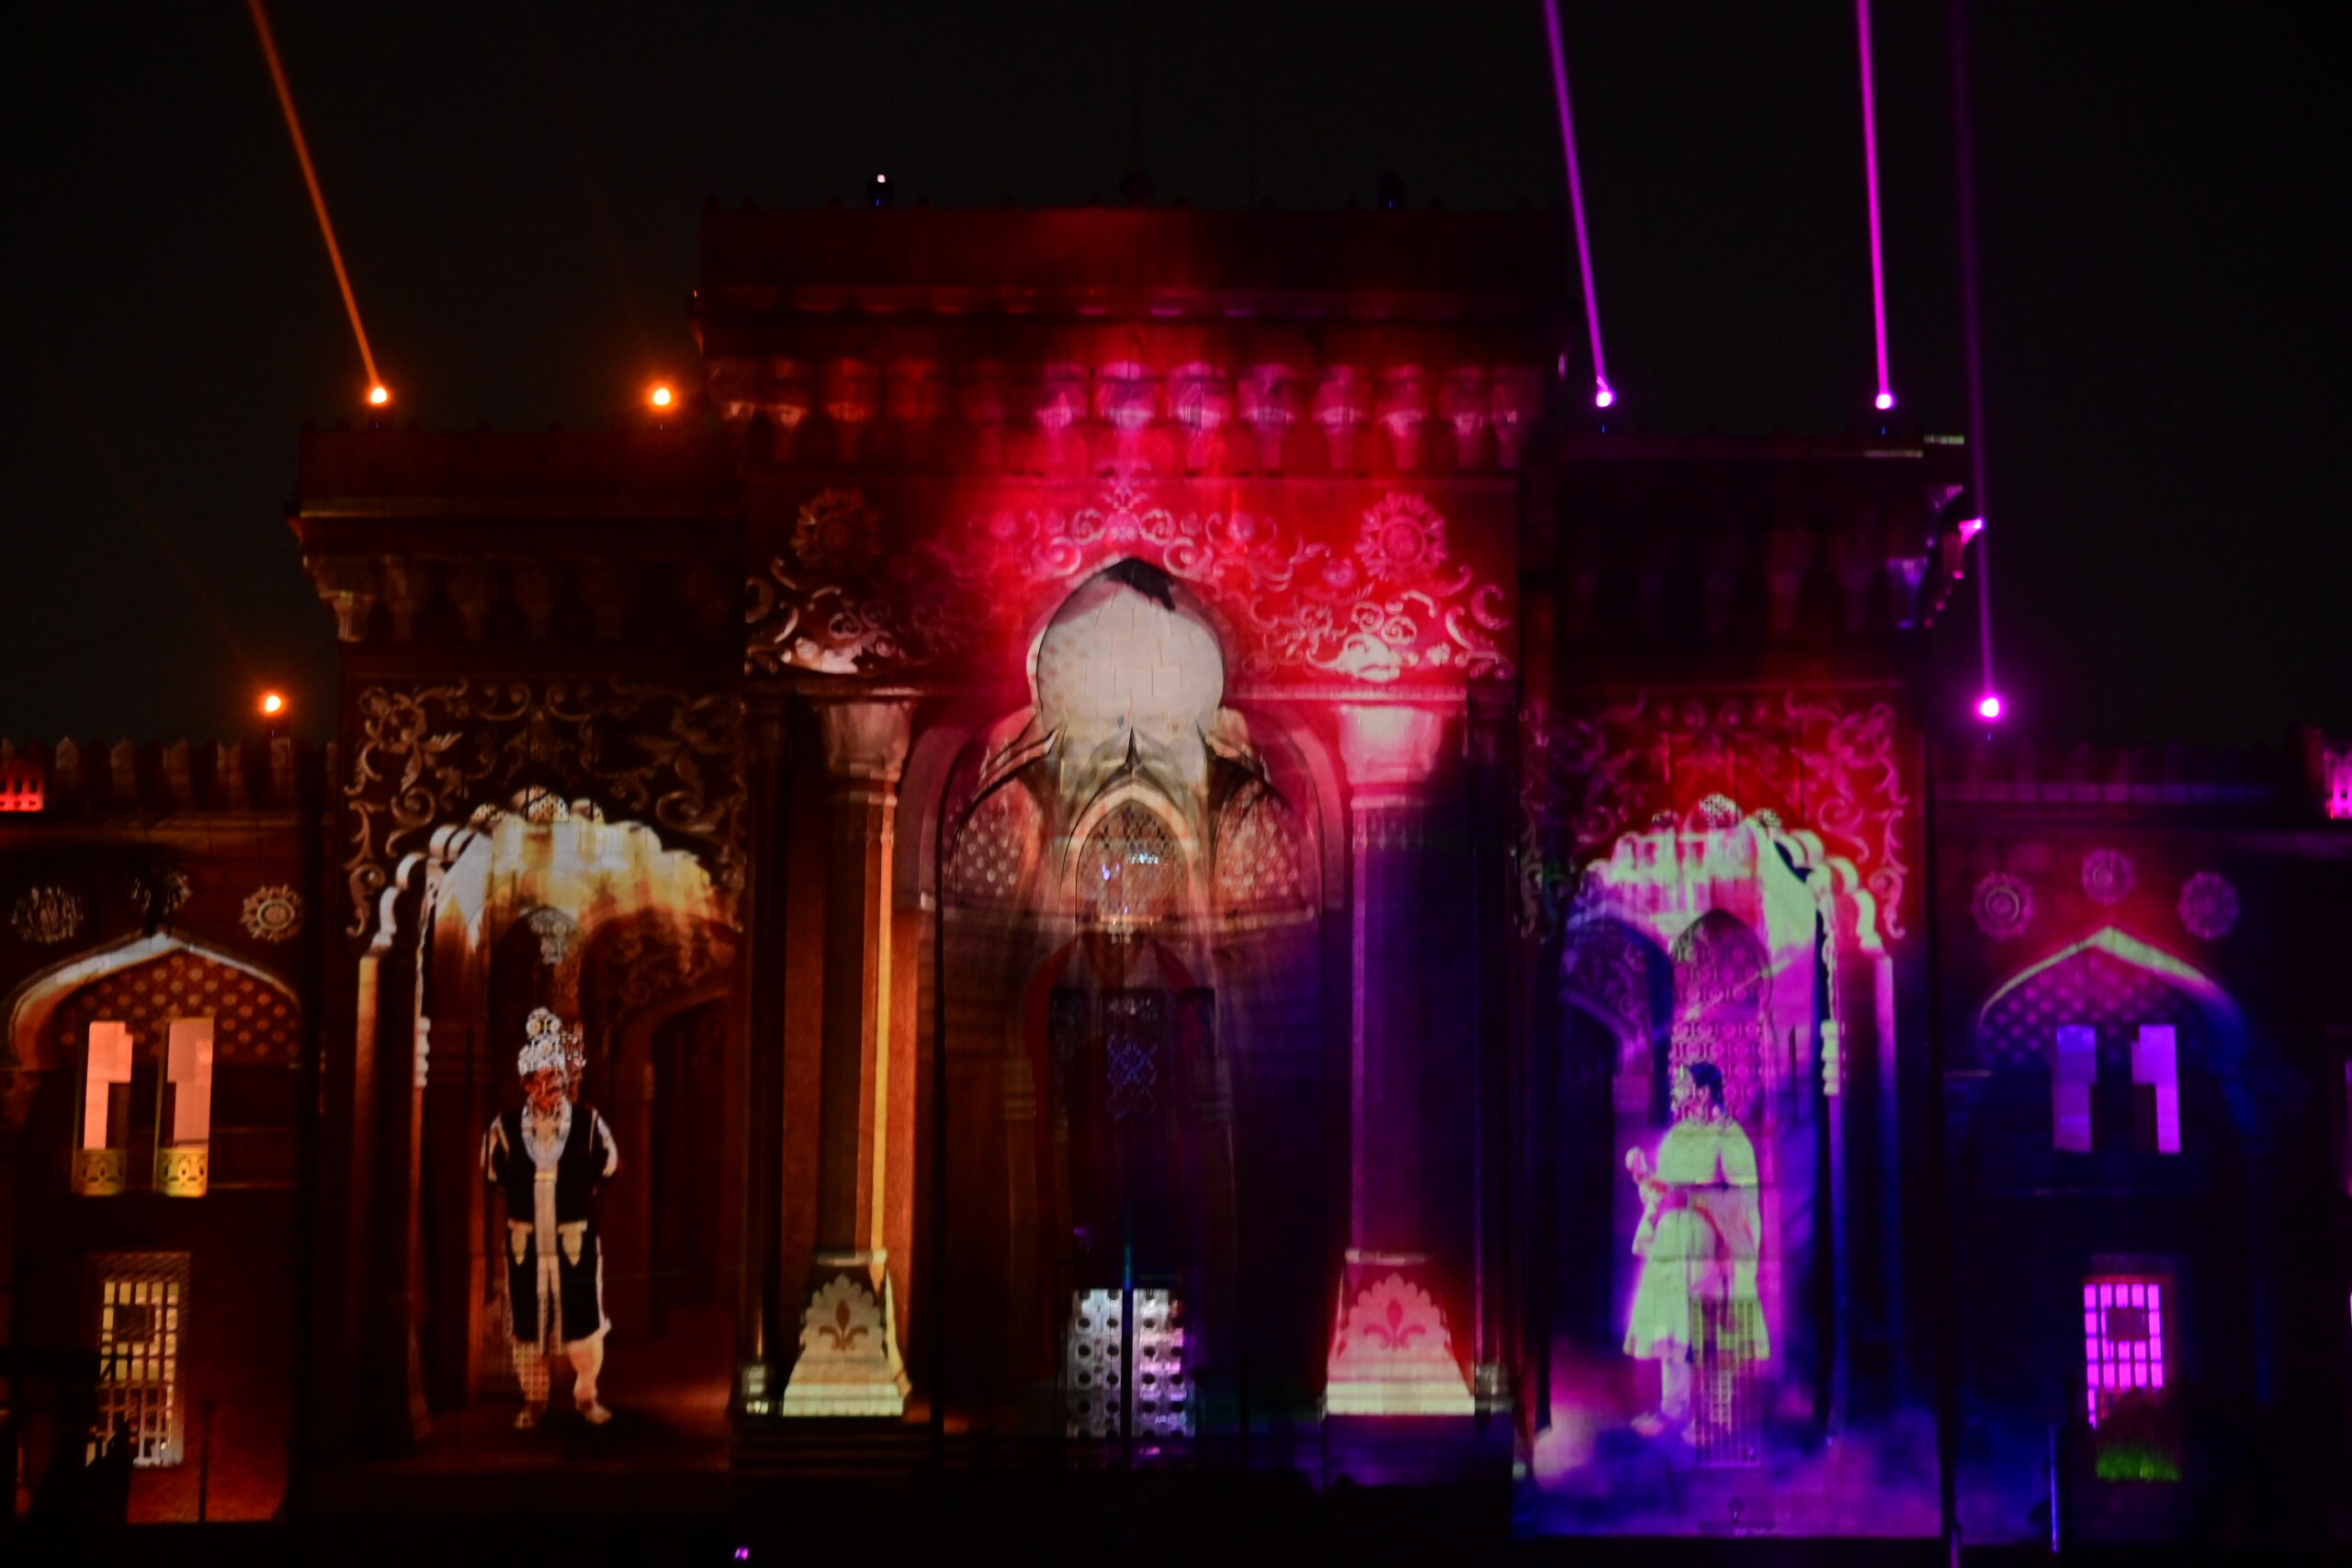 Dynamic Laser Show At Arts College In Osmania University (10)